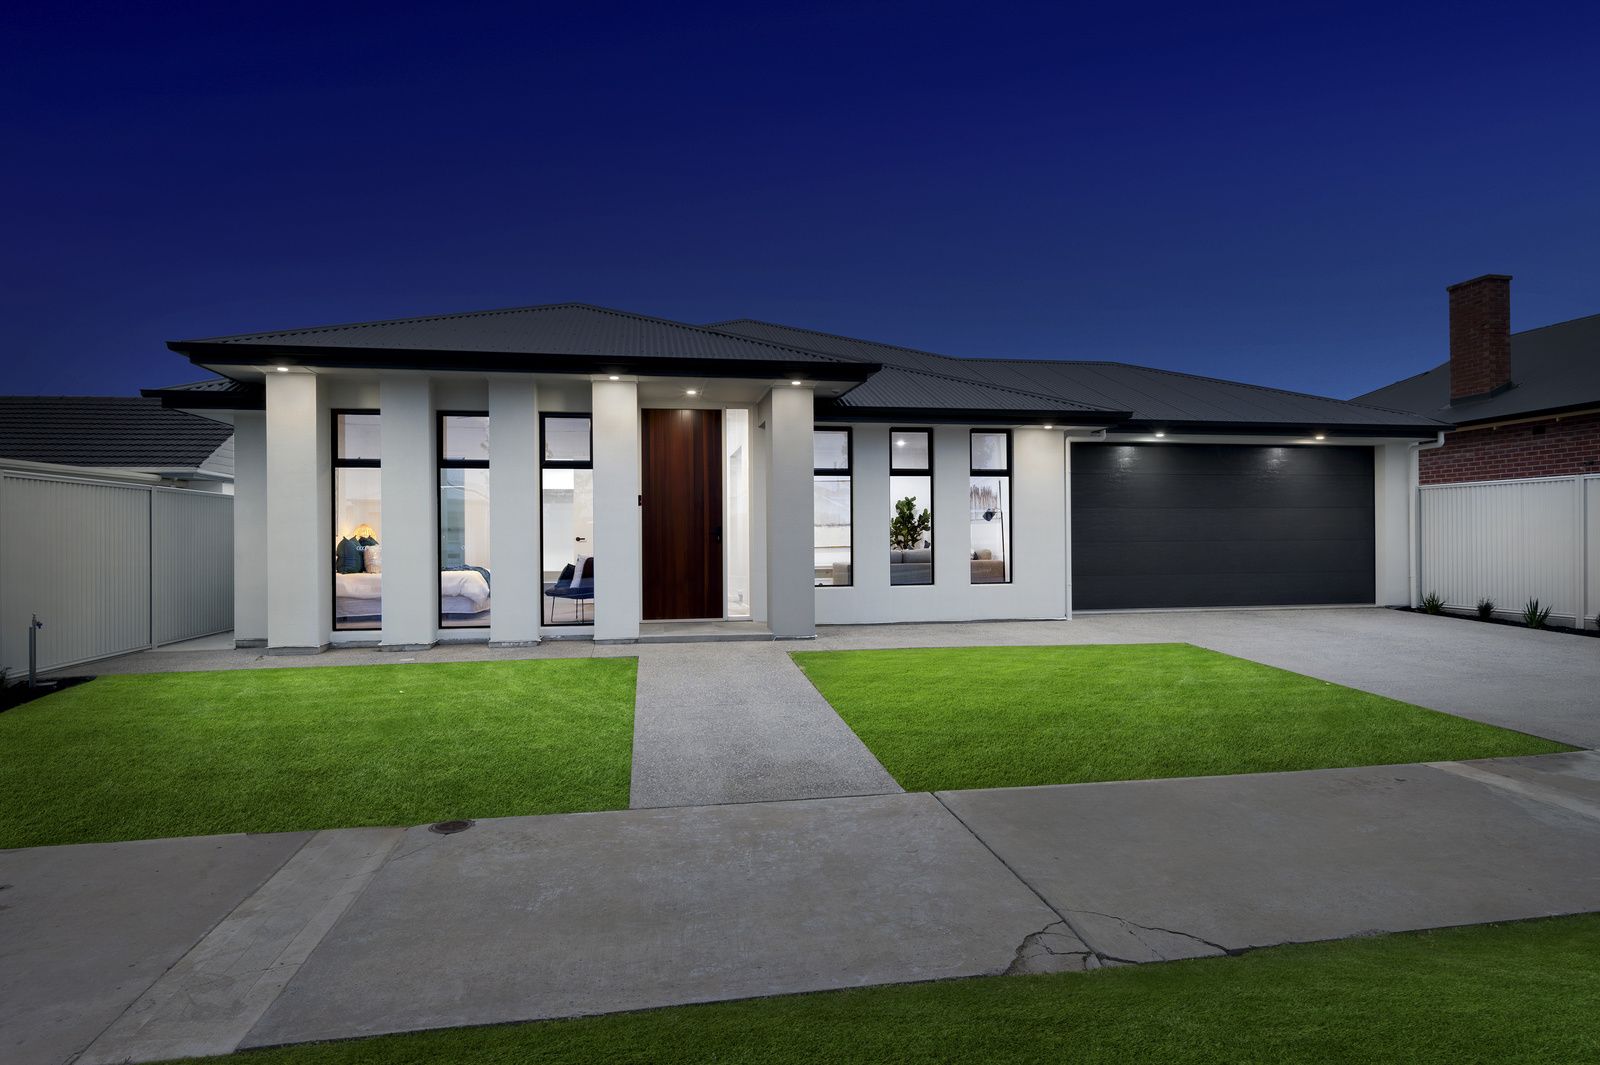 4 bedrooms House in 29 Lincoln Street LARGS BAY SA, 5016